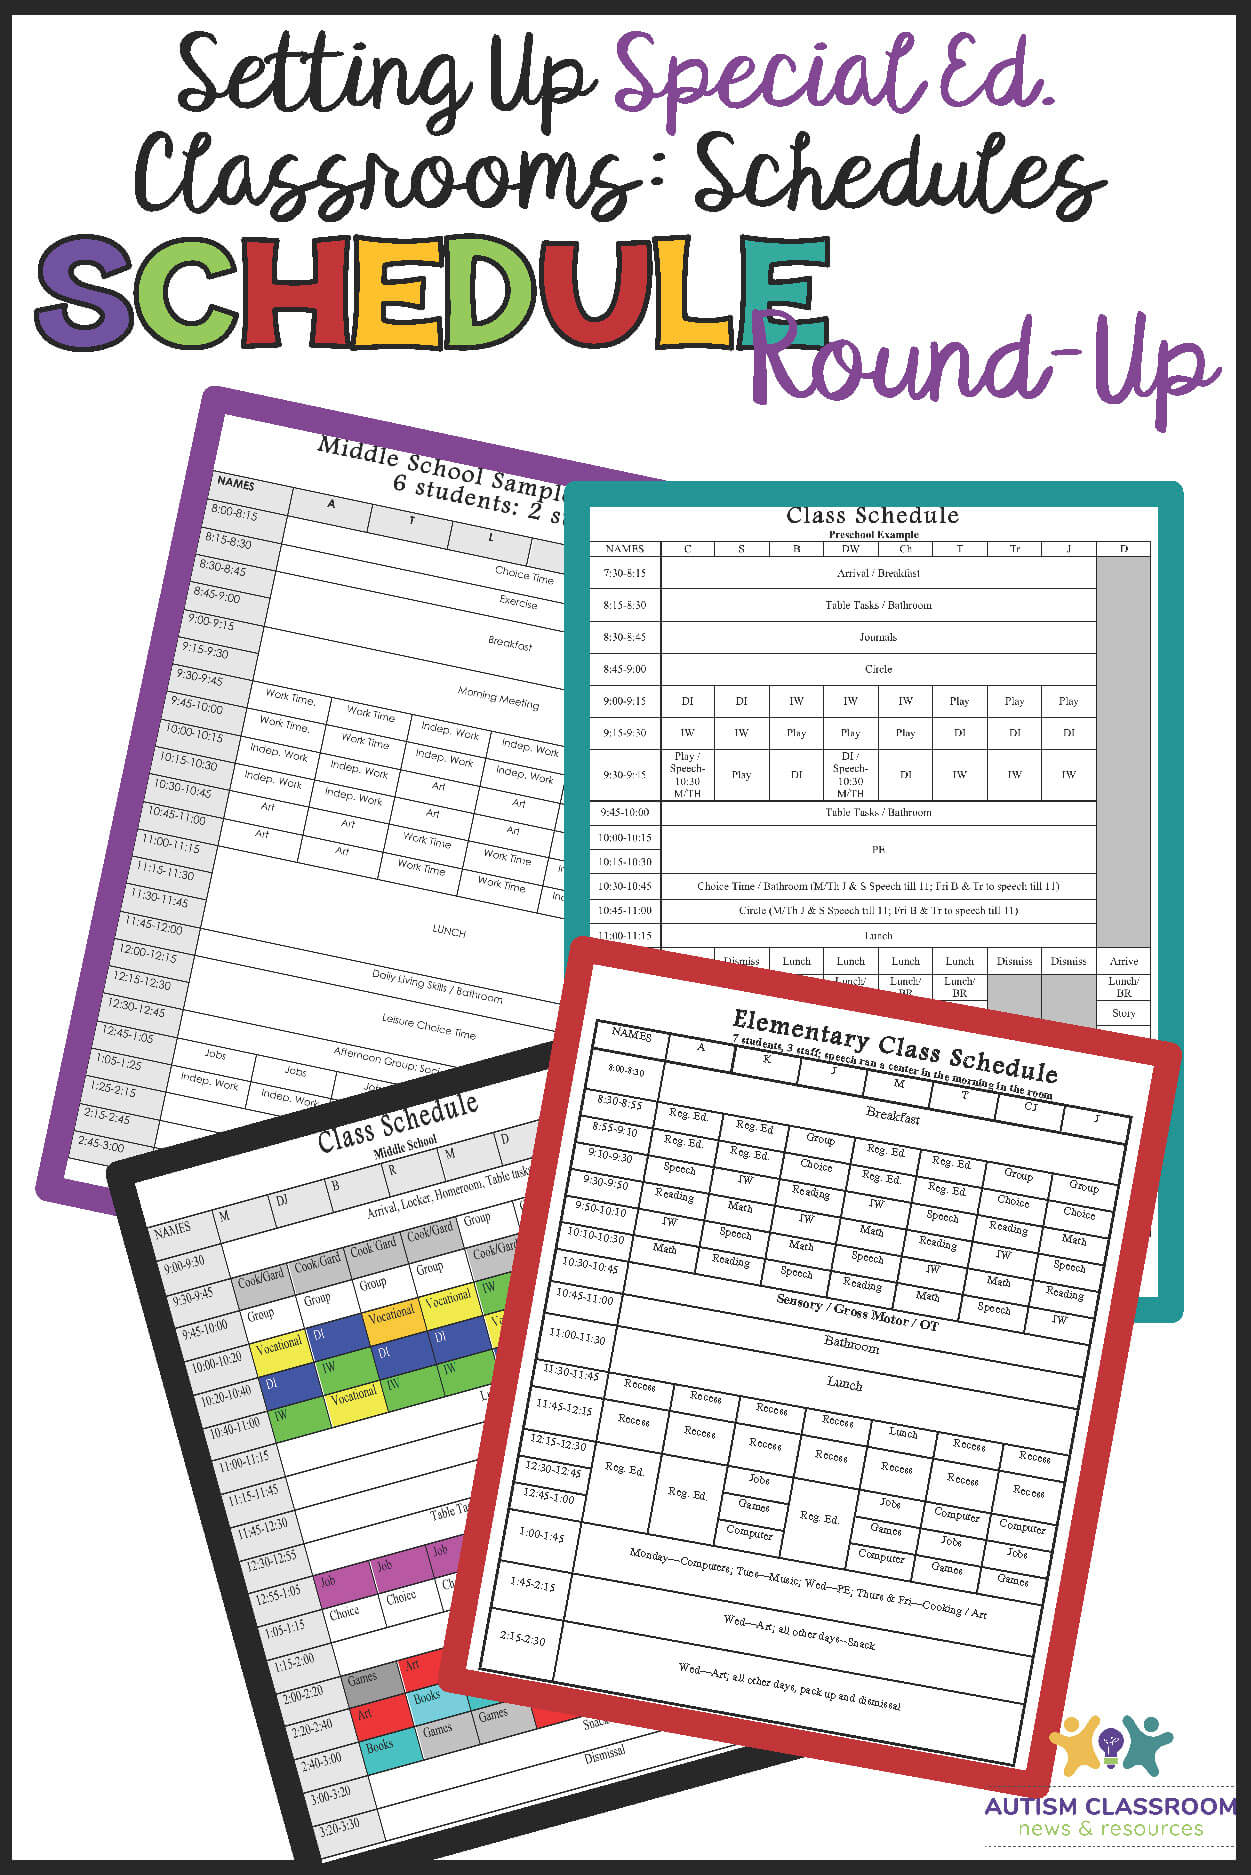 Special education class schedule roundup